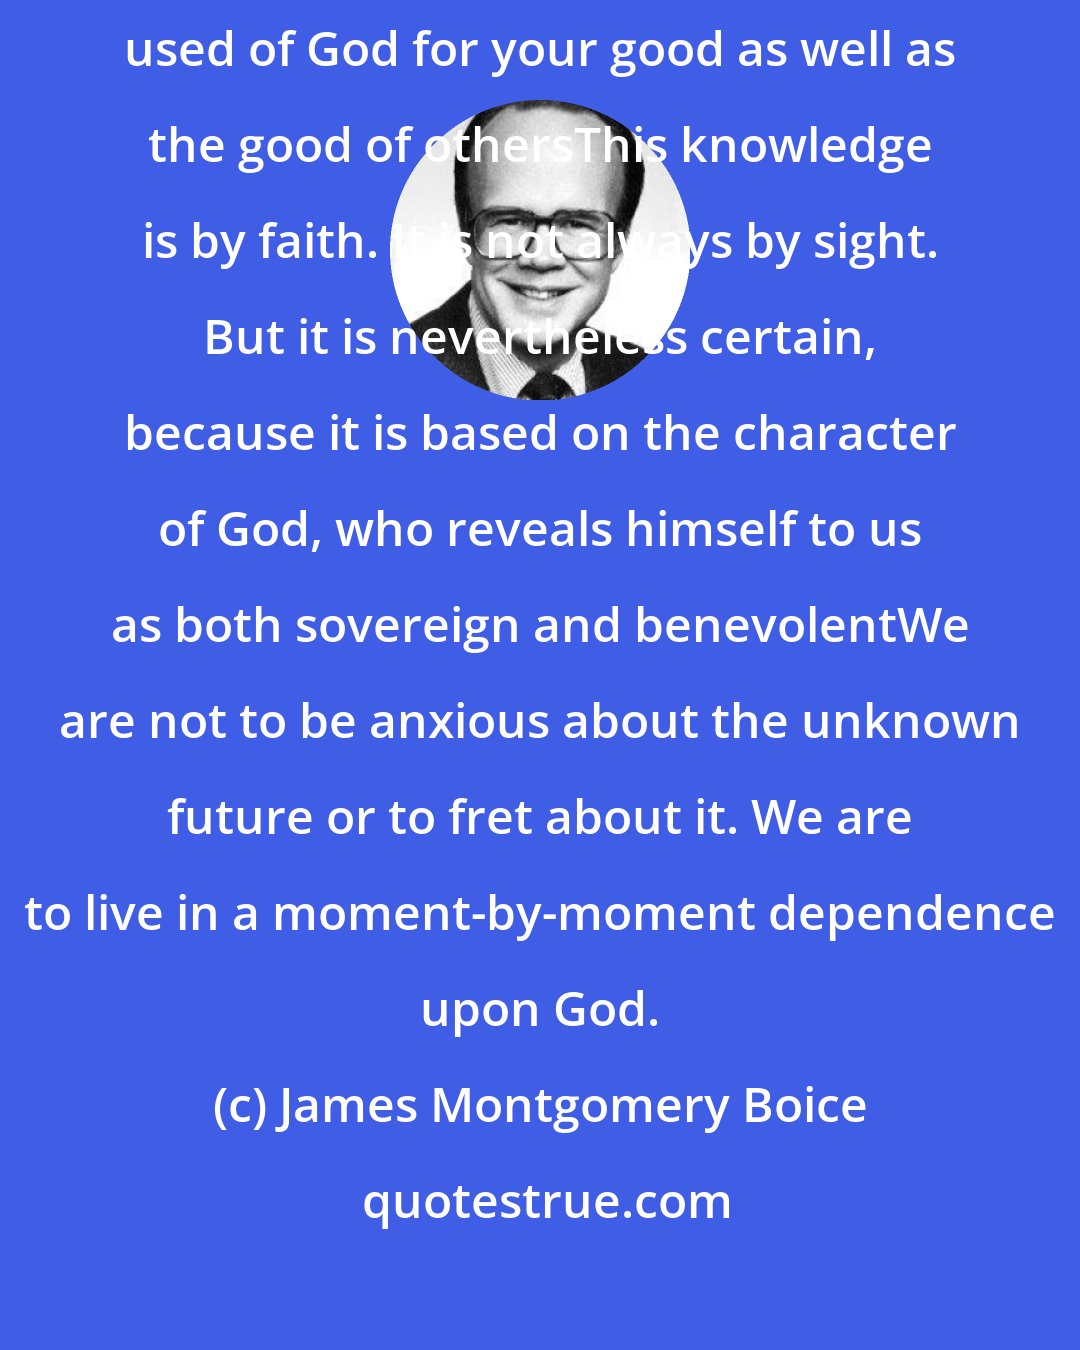 James Montgomery Boice: Whether you can see it or not - and often we cannot - everything is being used of God for your good as well as the good of othersThis knowledge is by faith. It is not always by sight. But it is nevertheless certain, because it is based on the character of God, who reveals himself to us as both sovereign and benevolentWe are not to be anxious about the unknown future or to fret about it. We are to live in a moment-by-moment dependence upon God.